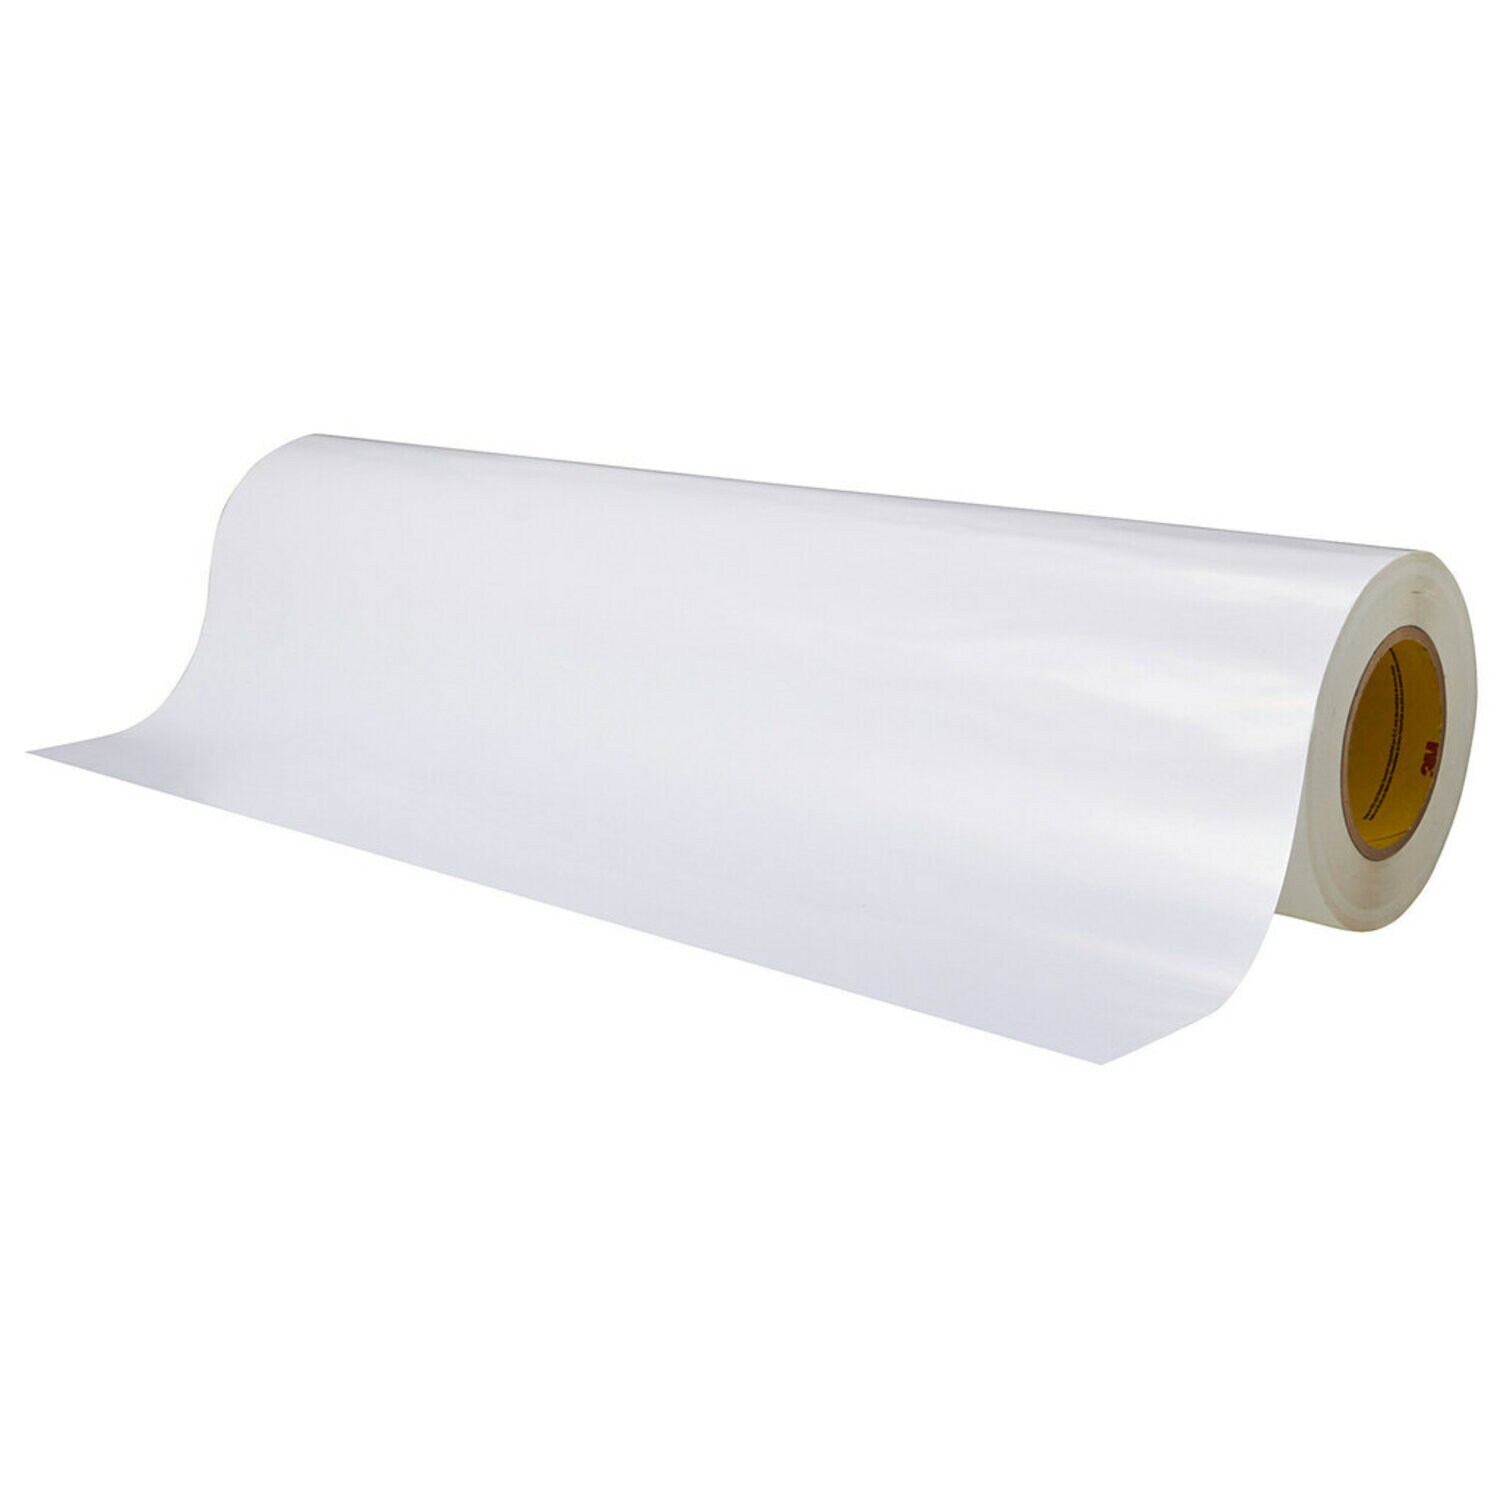 Concept 202 3.4mil Matte White Vinyl - Removeable Adhesive from